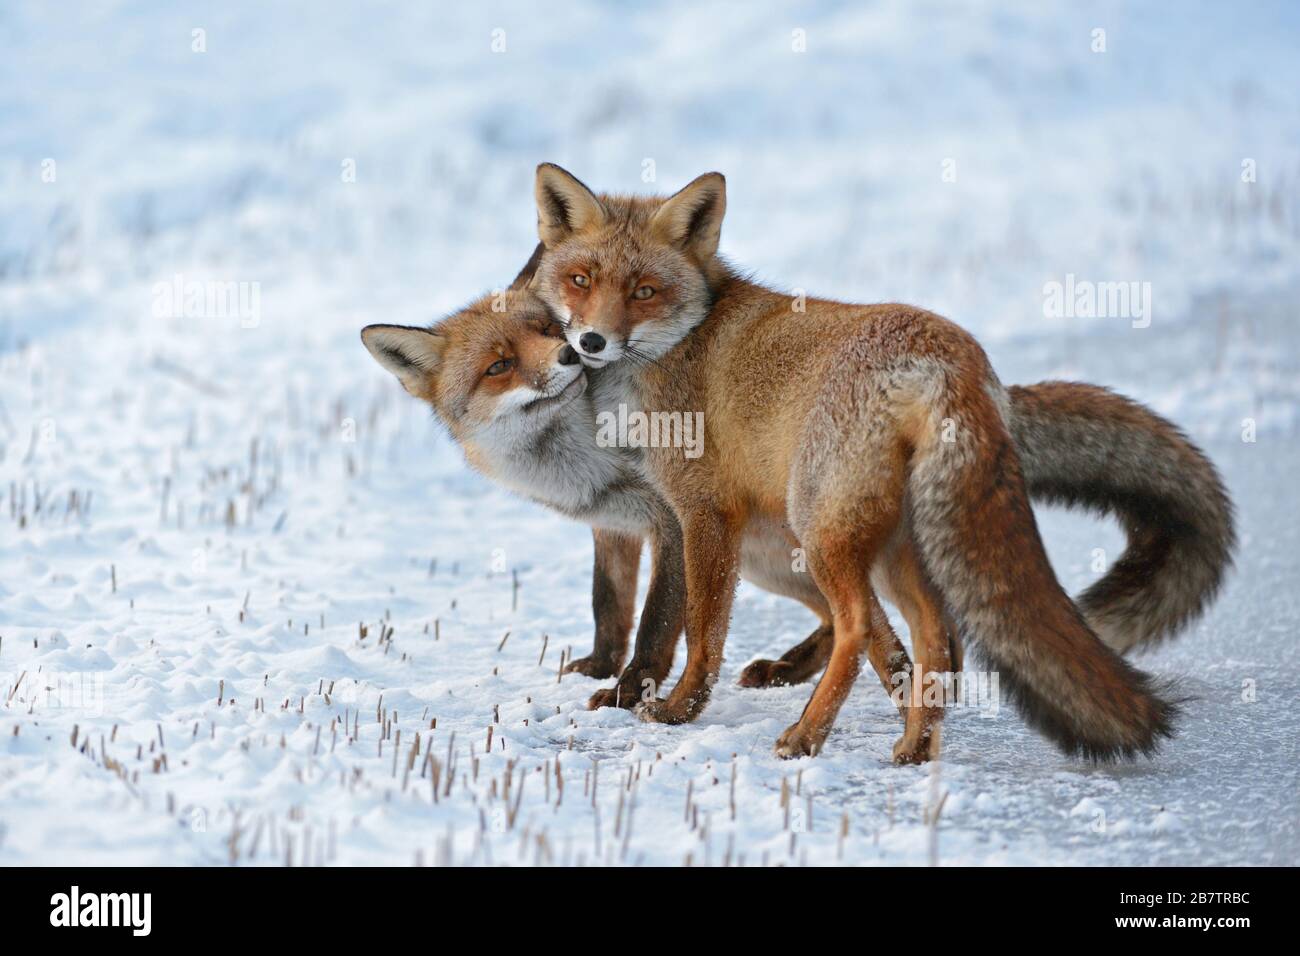 Red Fox ( Vulpes vulpes ), Red Foxes in love, caressing, tenderness, cute emotional behaviour, pair of foxes in winter, snow, wildlife, Europe. Stock Photo